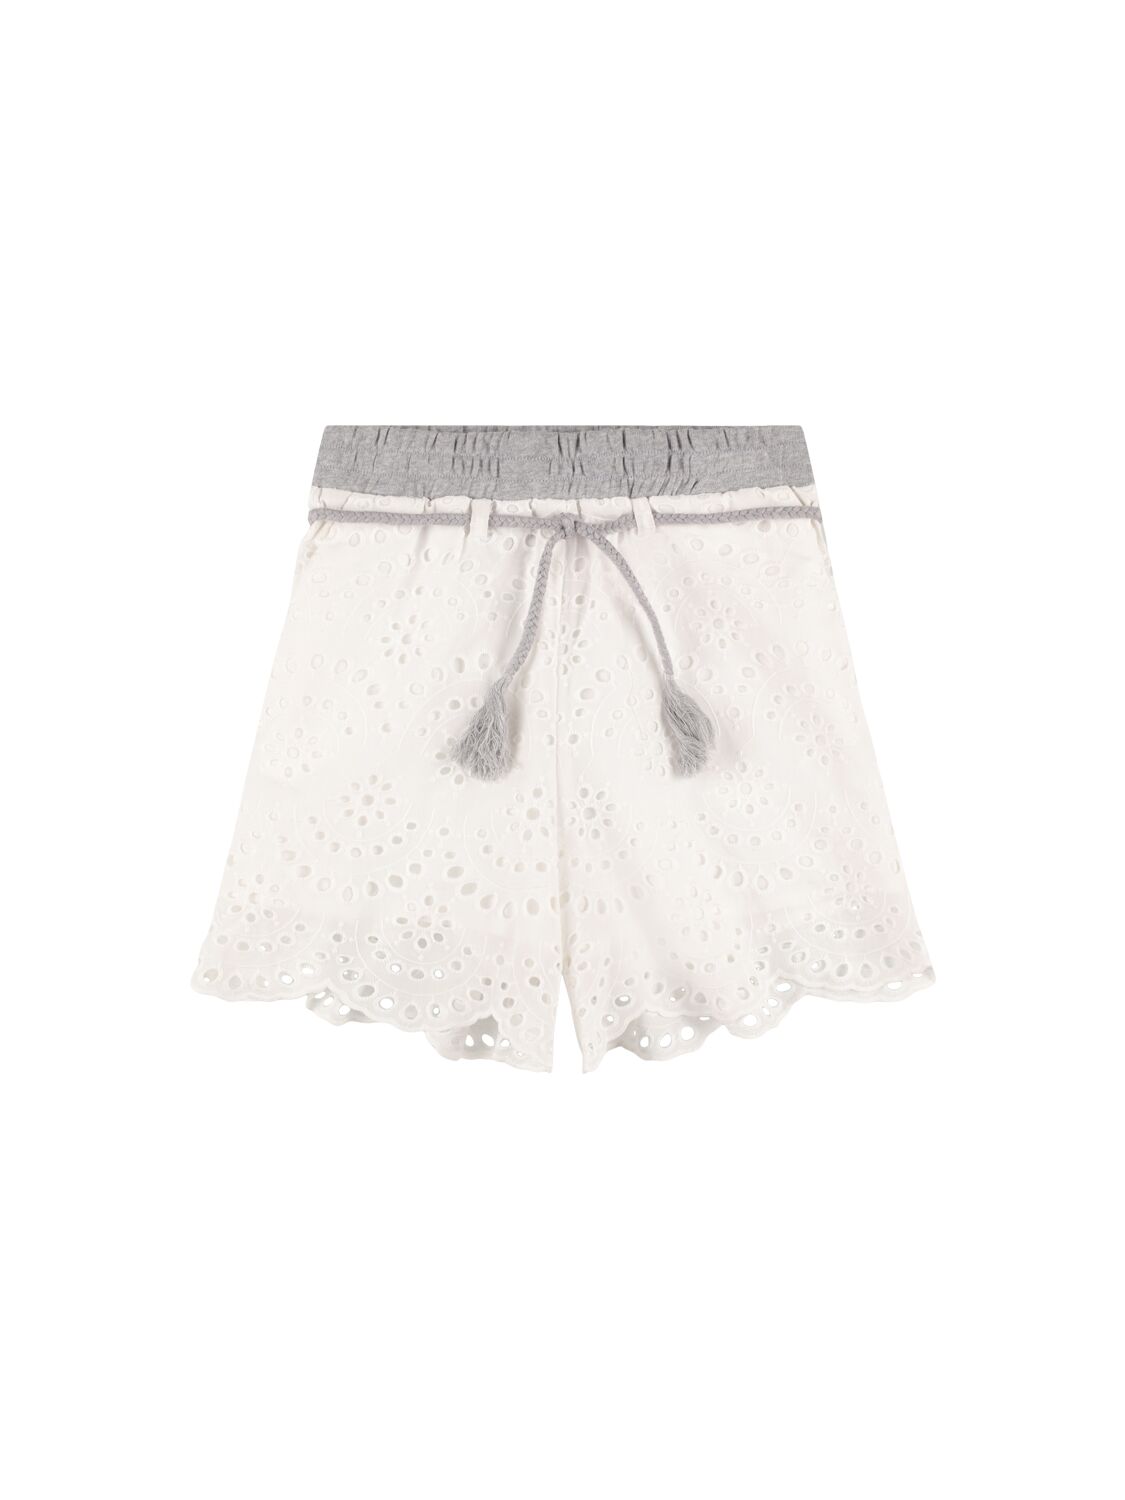 Max & Co Kids' Cotton Eyelet Lace Shorts W/bow In White